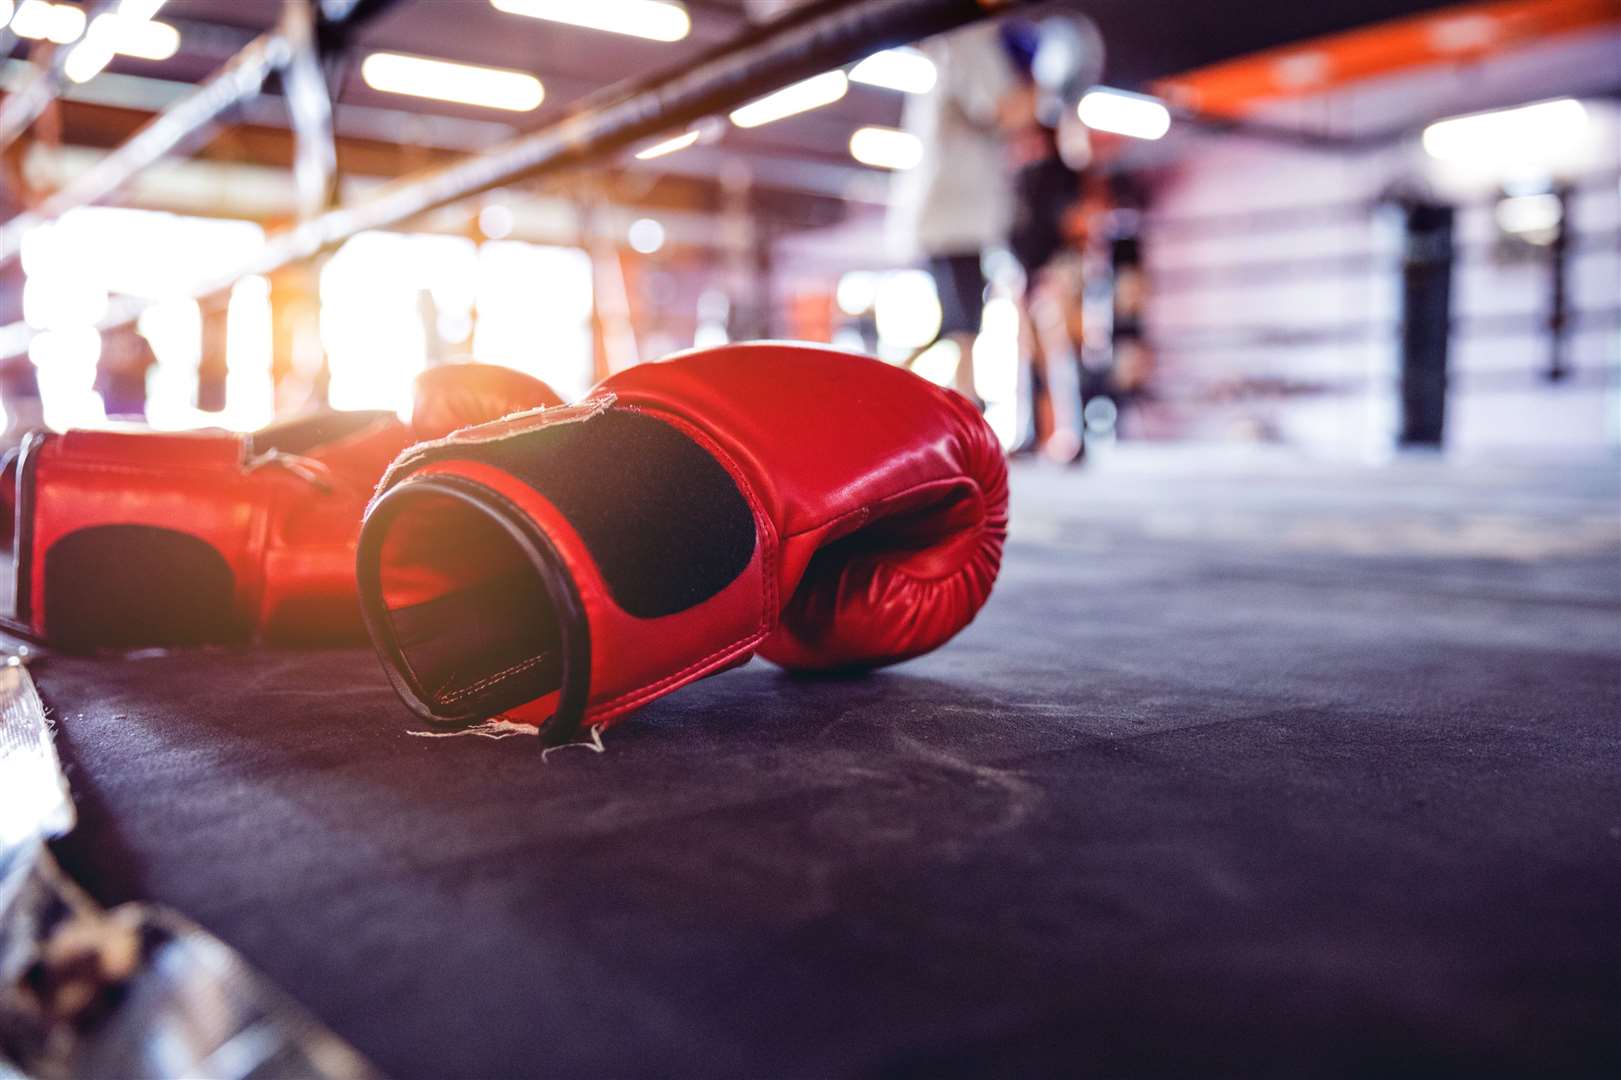 The Paramount Foundation provides local free sessions, including boxing